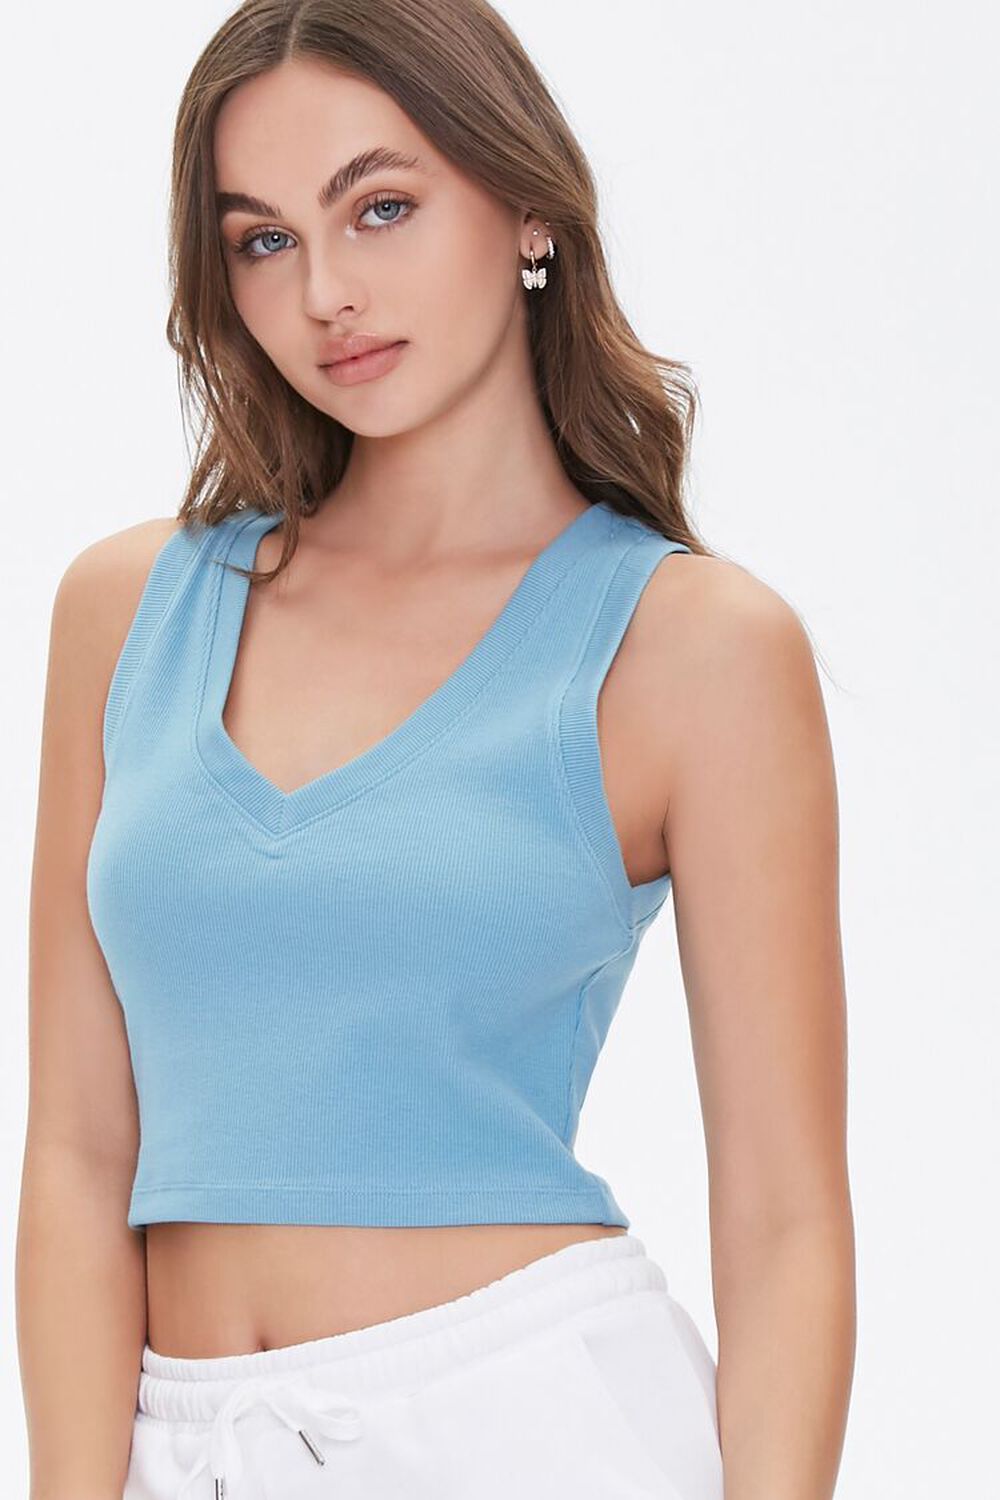 BLUE Cropped Tank Top, image 1